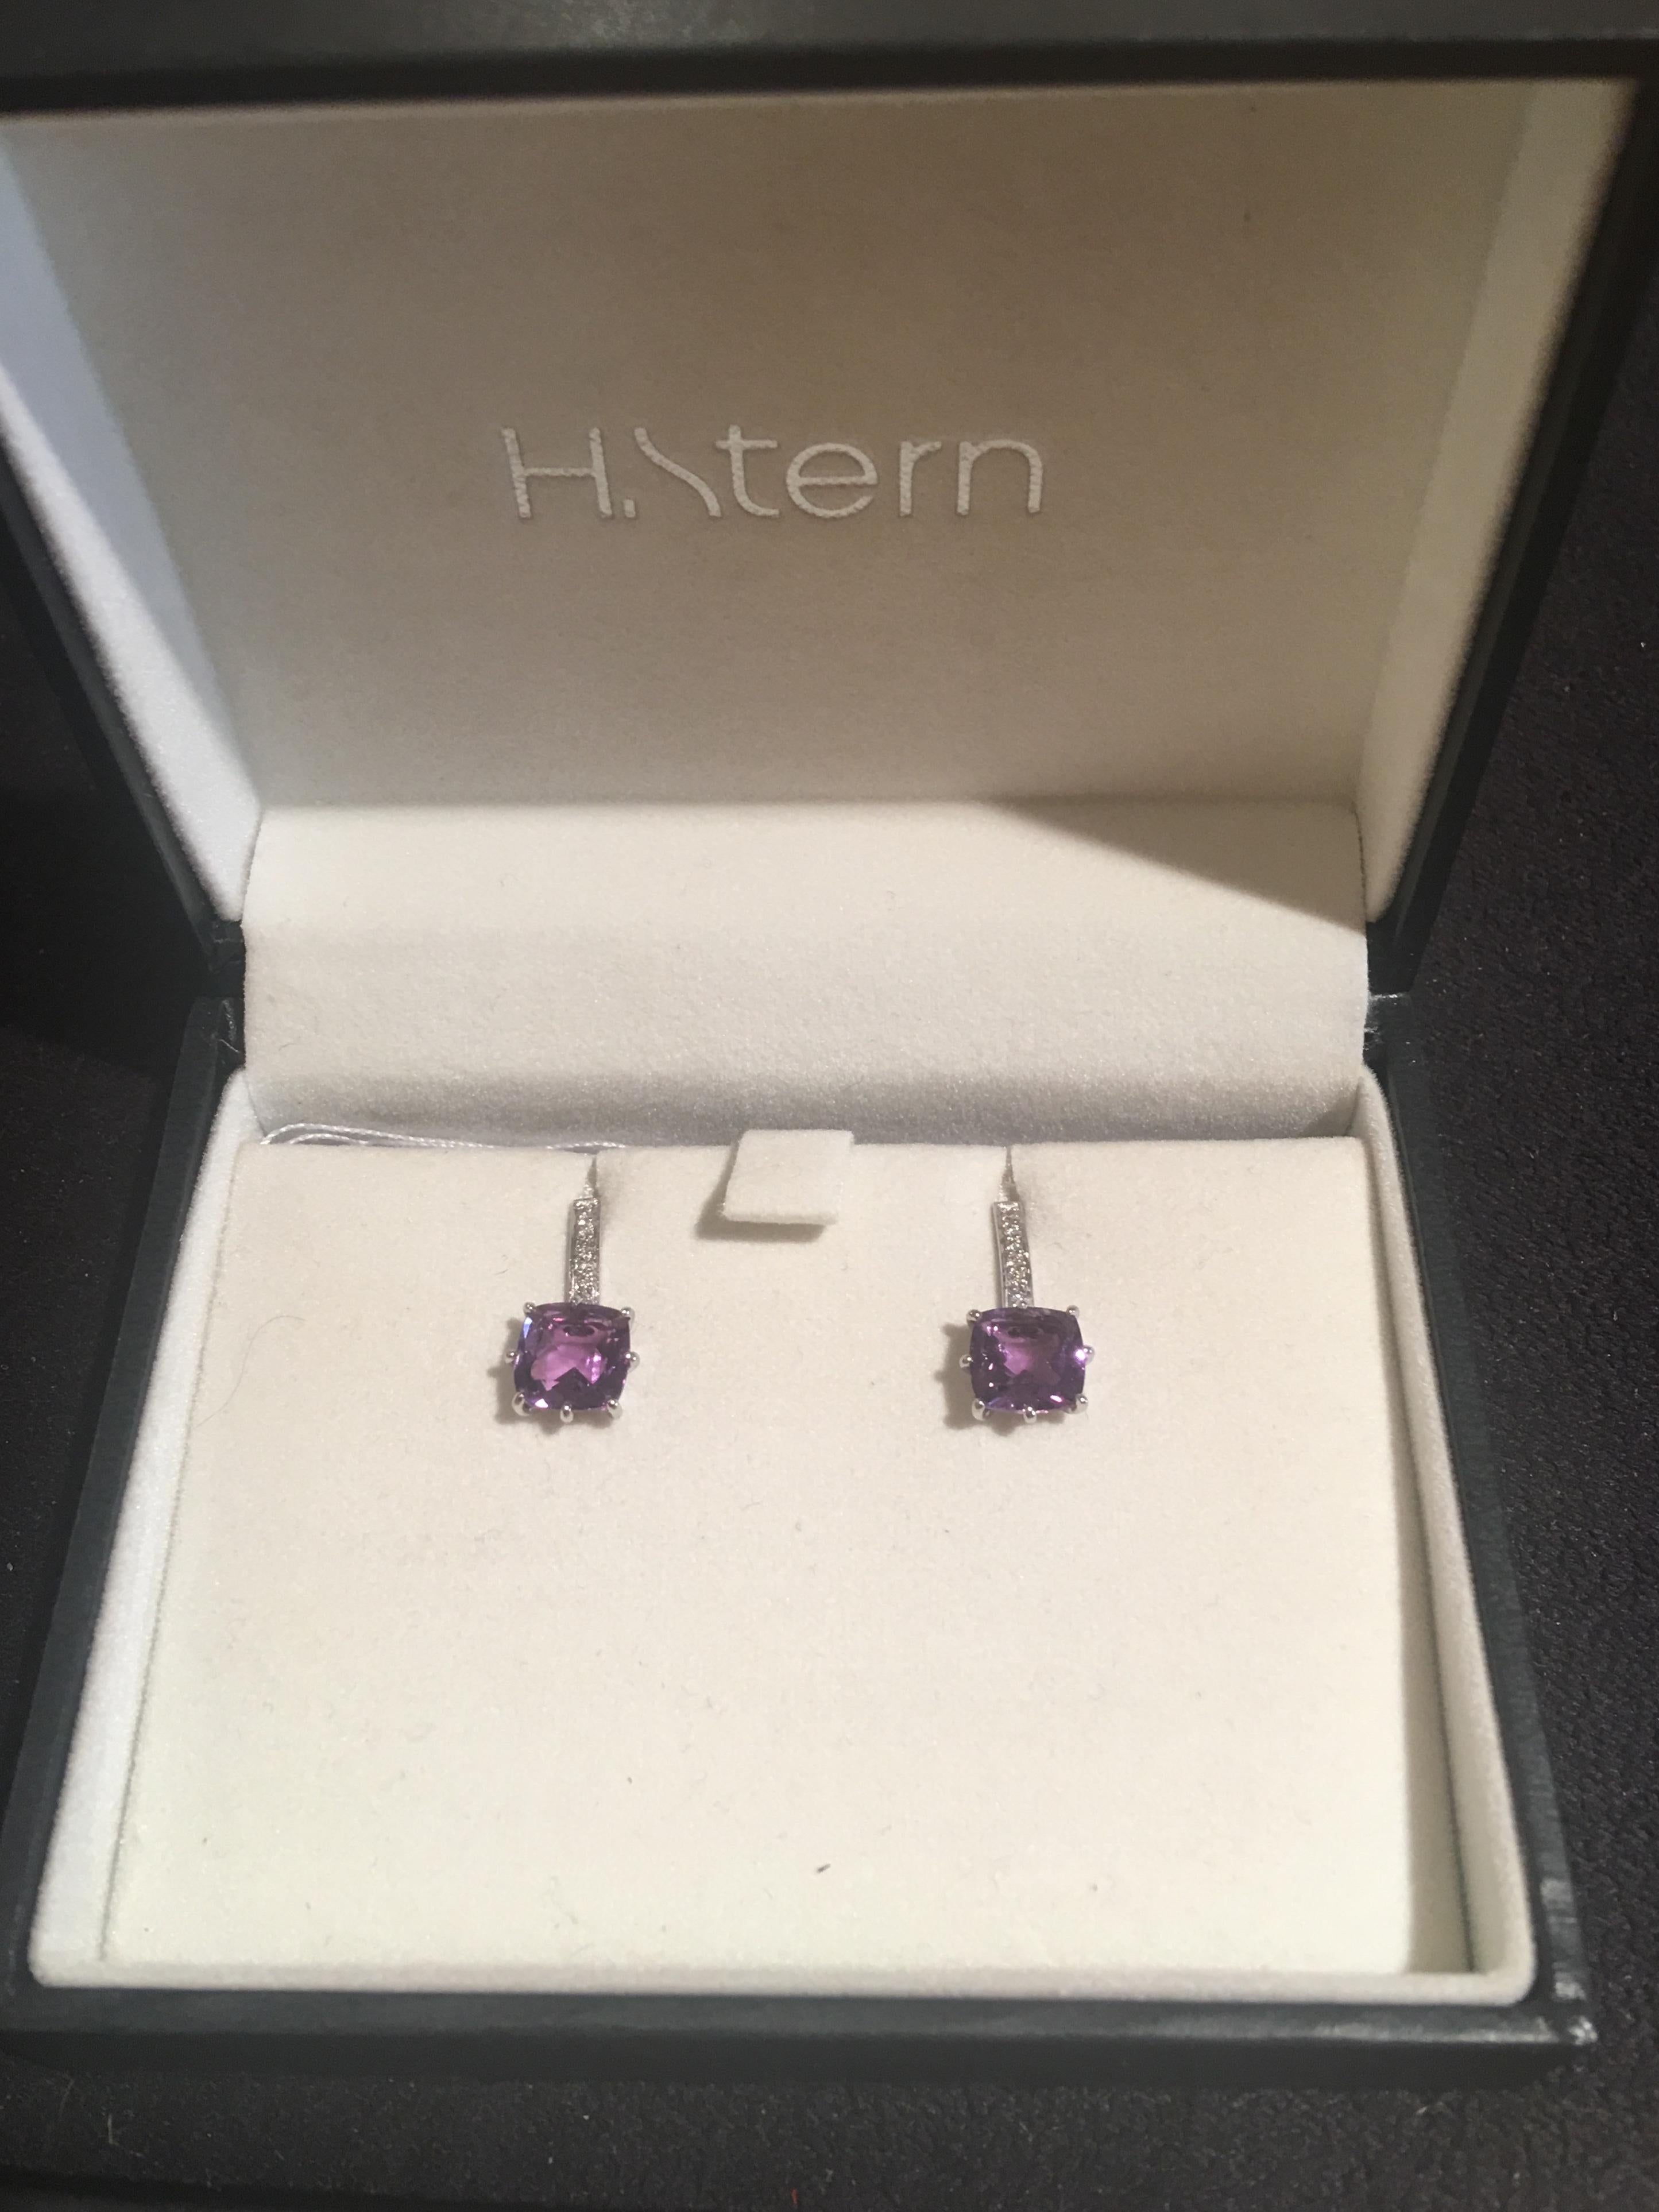 A fine and elegant pair of earrings made of amethyste cushion cut drops.

18K white gold 750 / 1000eme set with diamonds.

Signed H. Stern

Length: 1.9 cm

Dimension of the cushion amethyste: 9 X 9 mm

Total weight 3.3gr

Within its original box